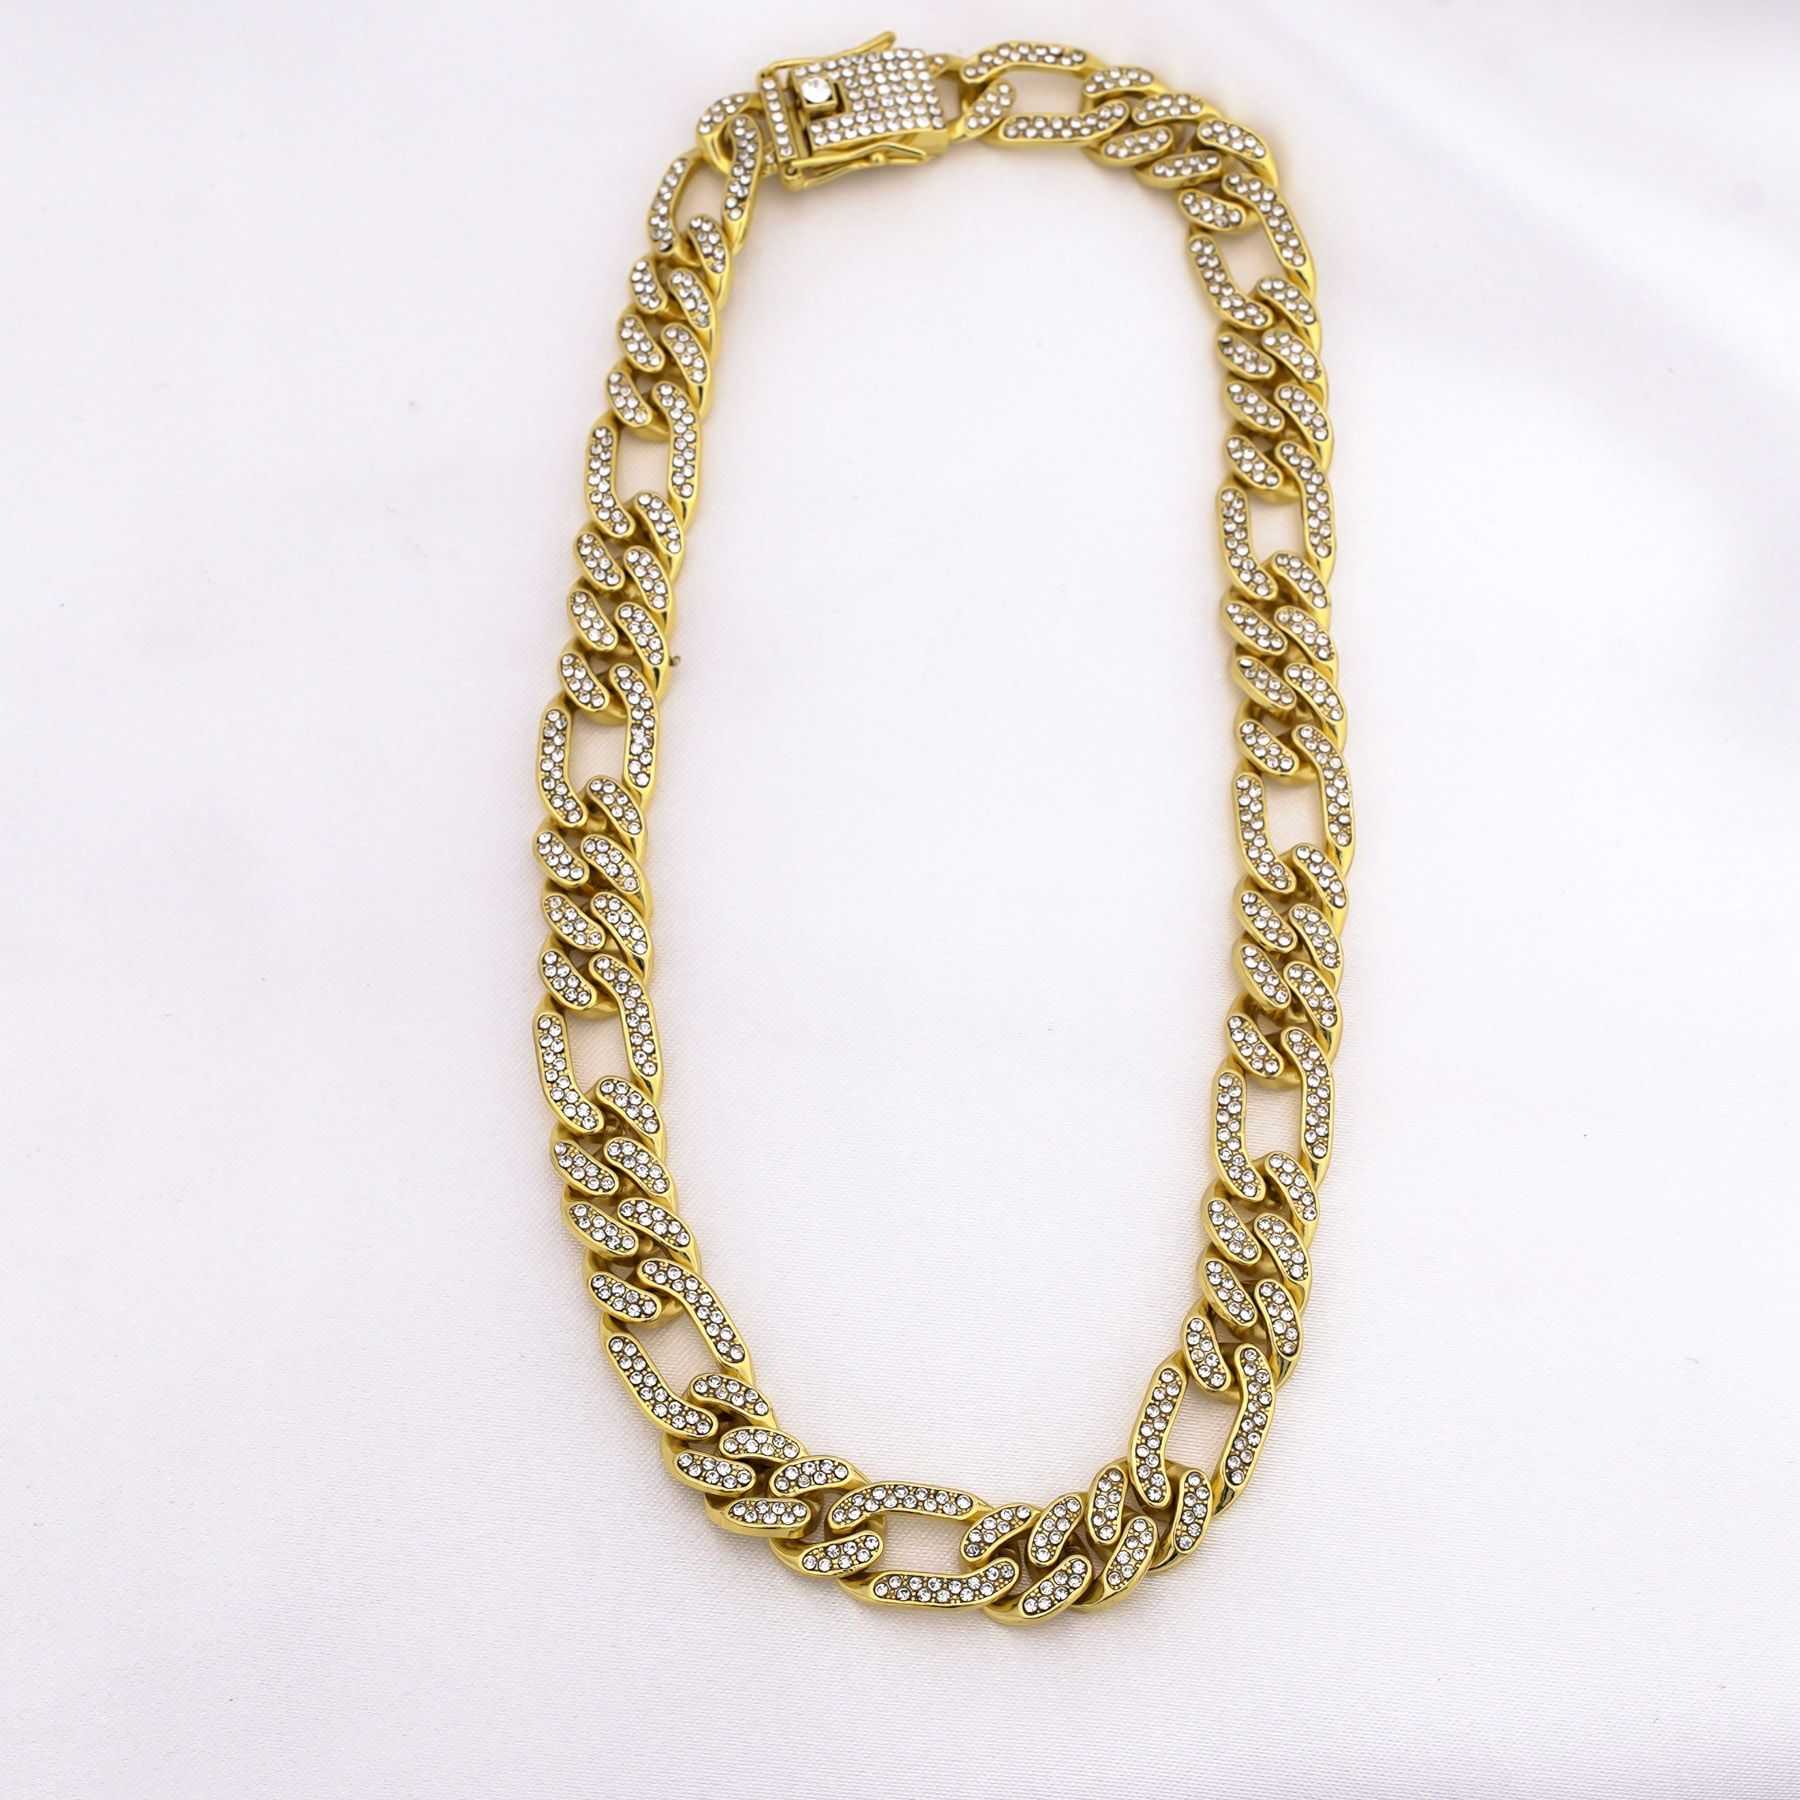 TRAP KING CHAIN NECKLACE - GOLD